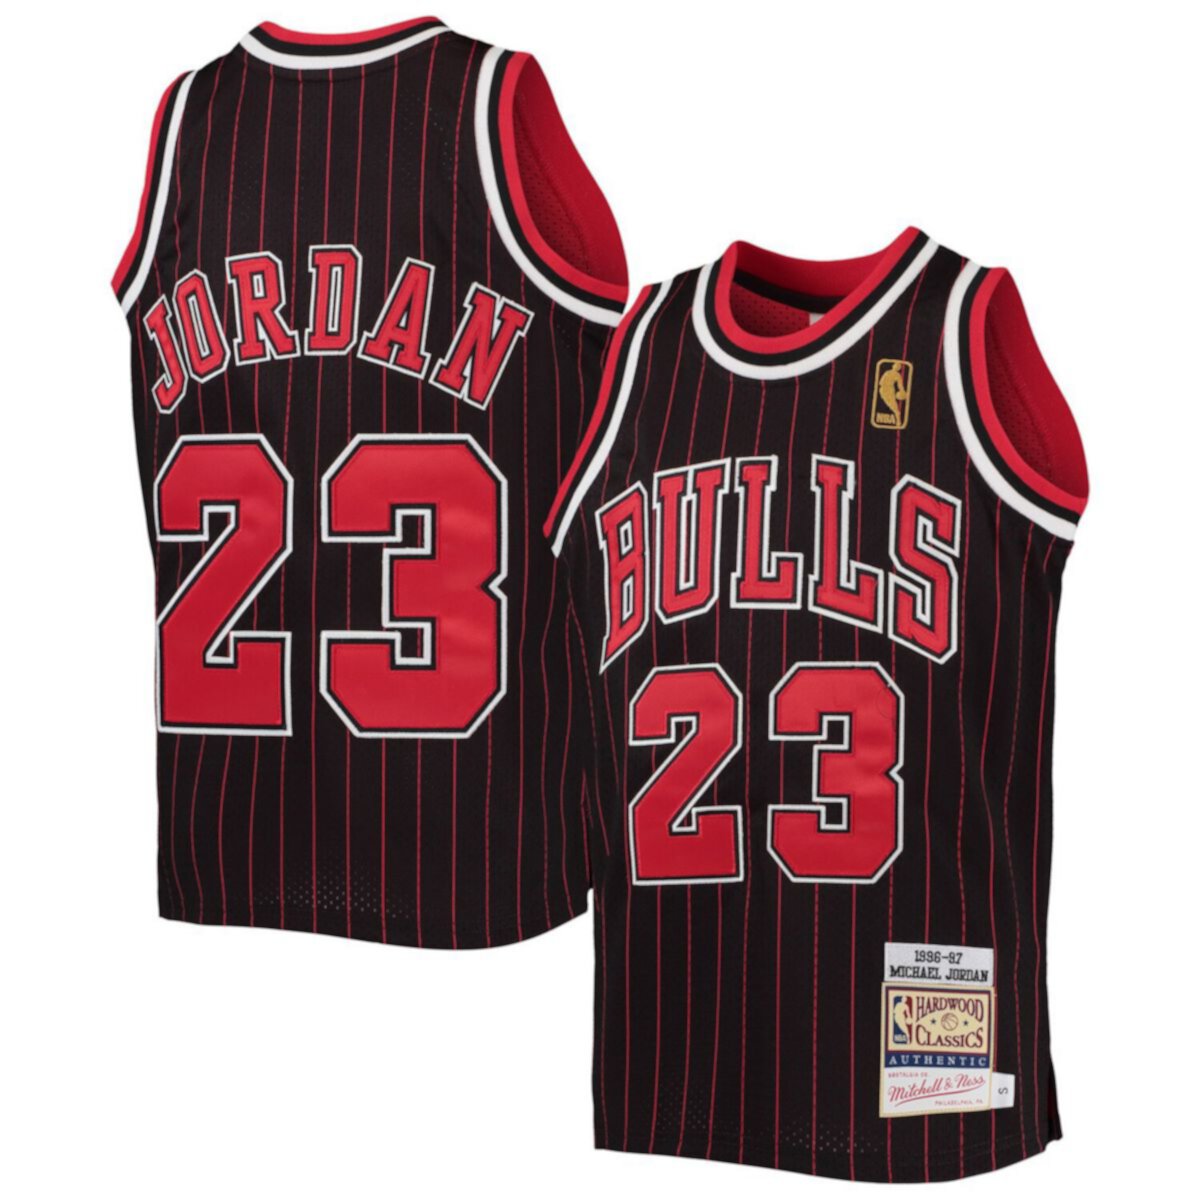 Youth Mitchell & Ness Michael Jordan Black/Red Chicago Bulls 1996-97 Hardwood Classics Authentic Jersey Unbranded